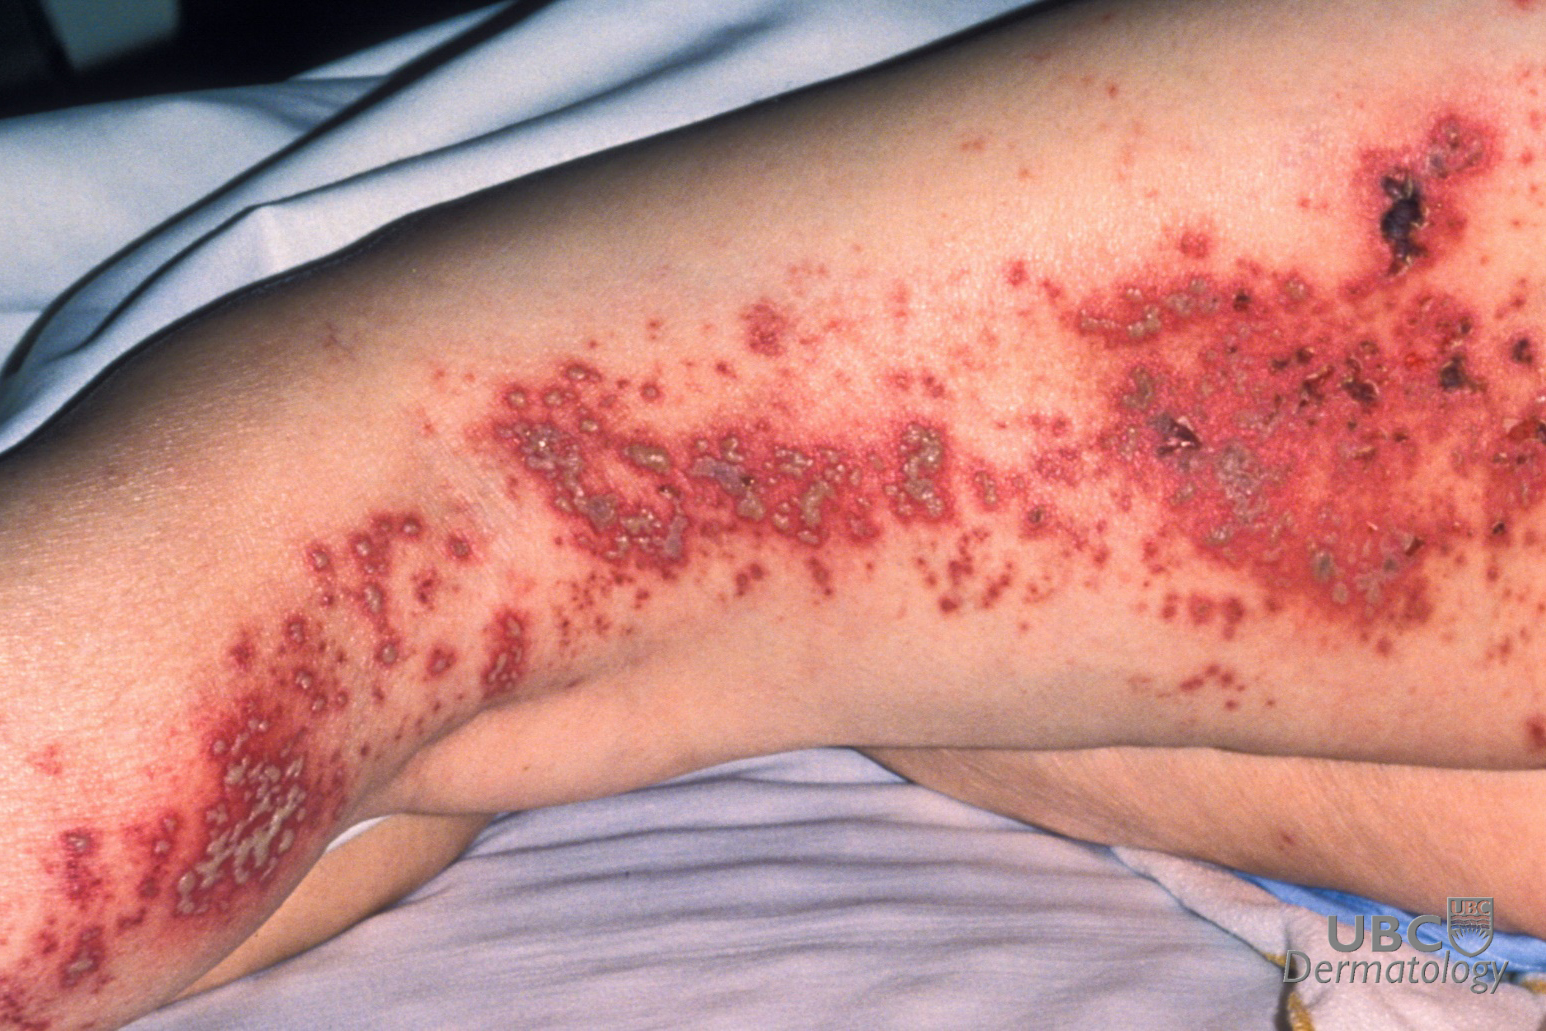 Shingles herpes zoster HL